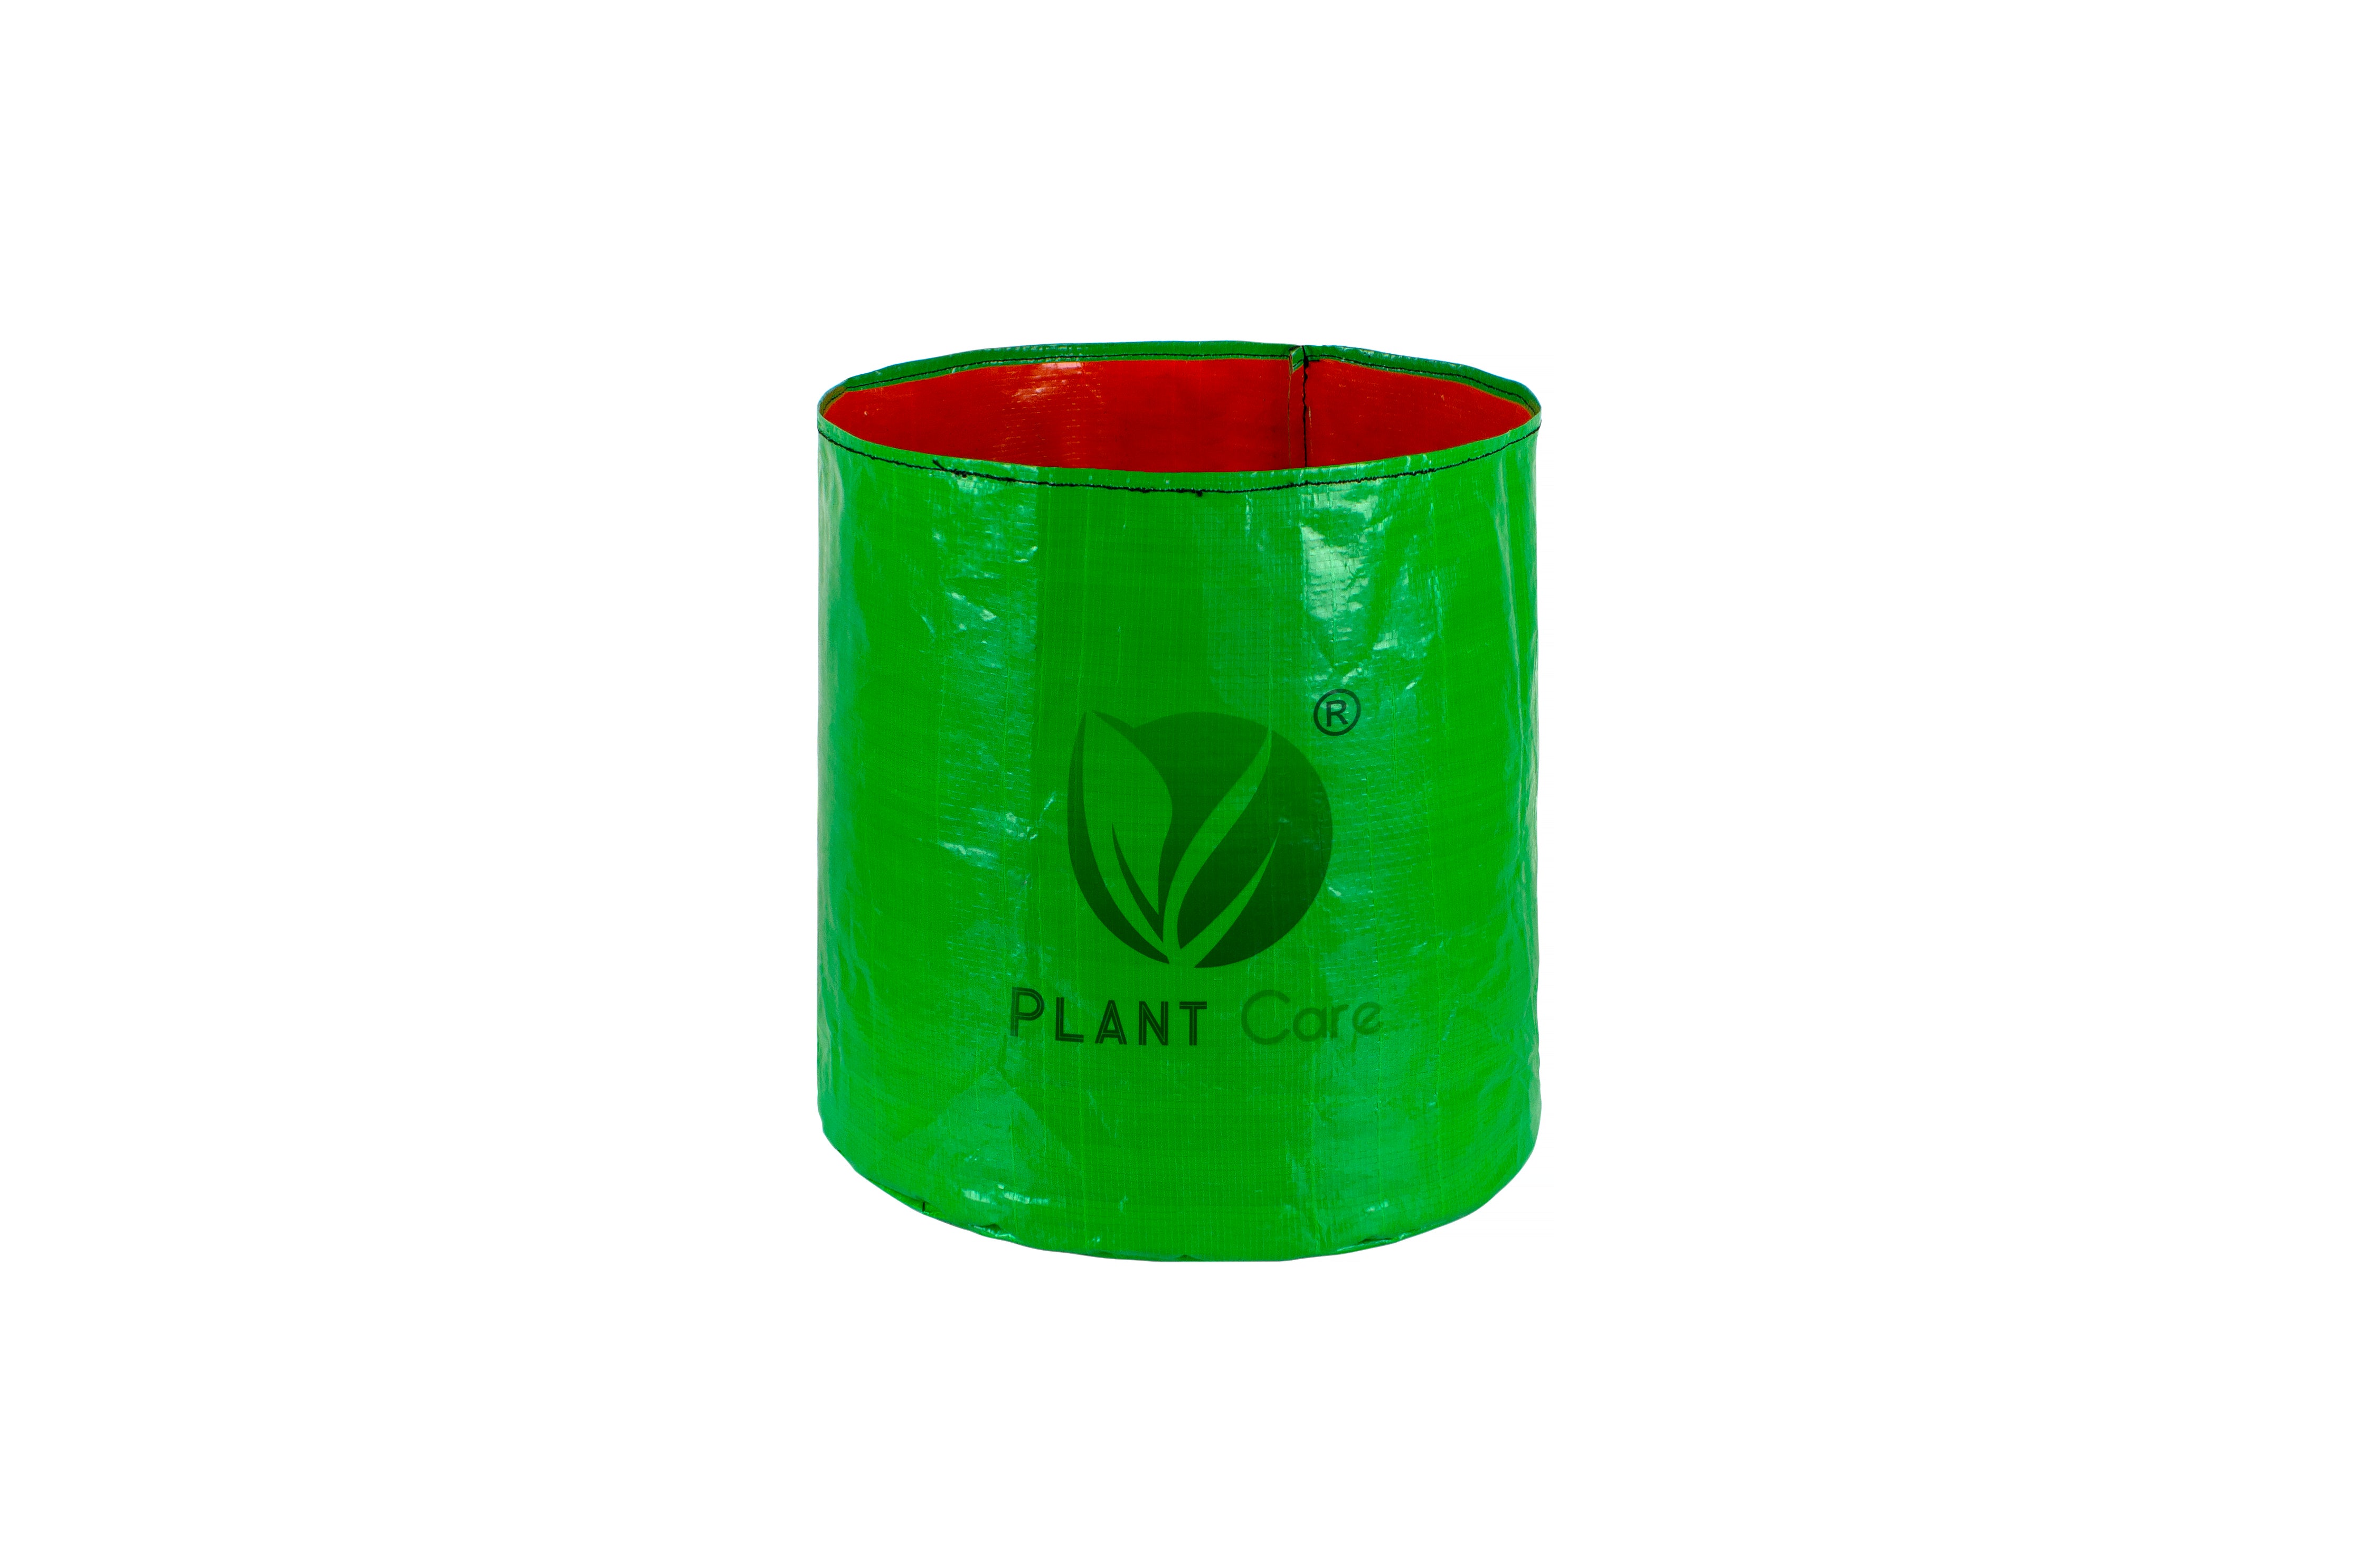 A round 15-inch by 15-inch grow bag for planting and growing your favorite plants